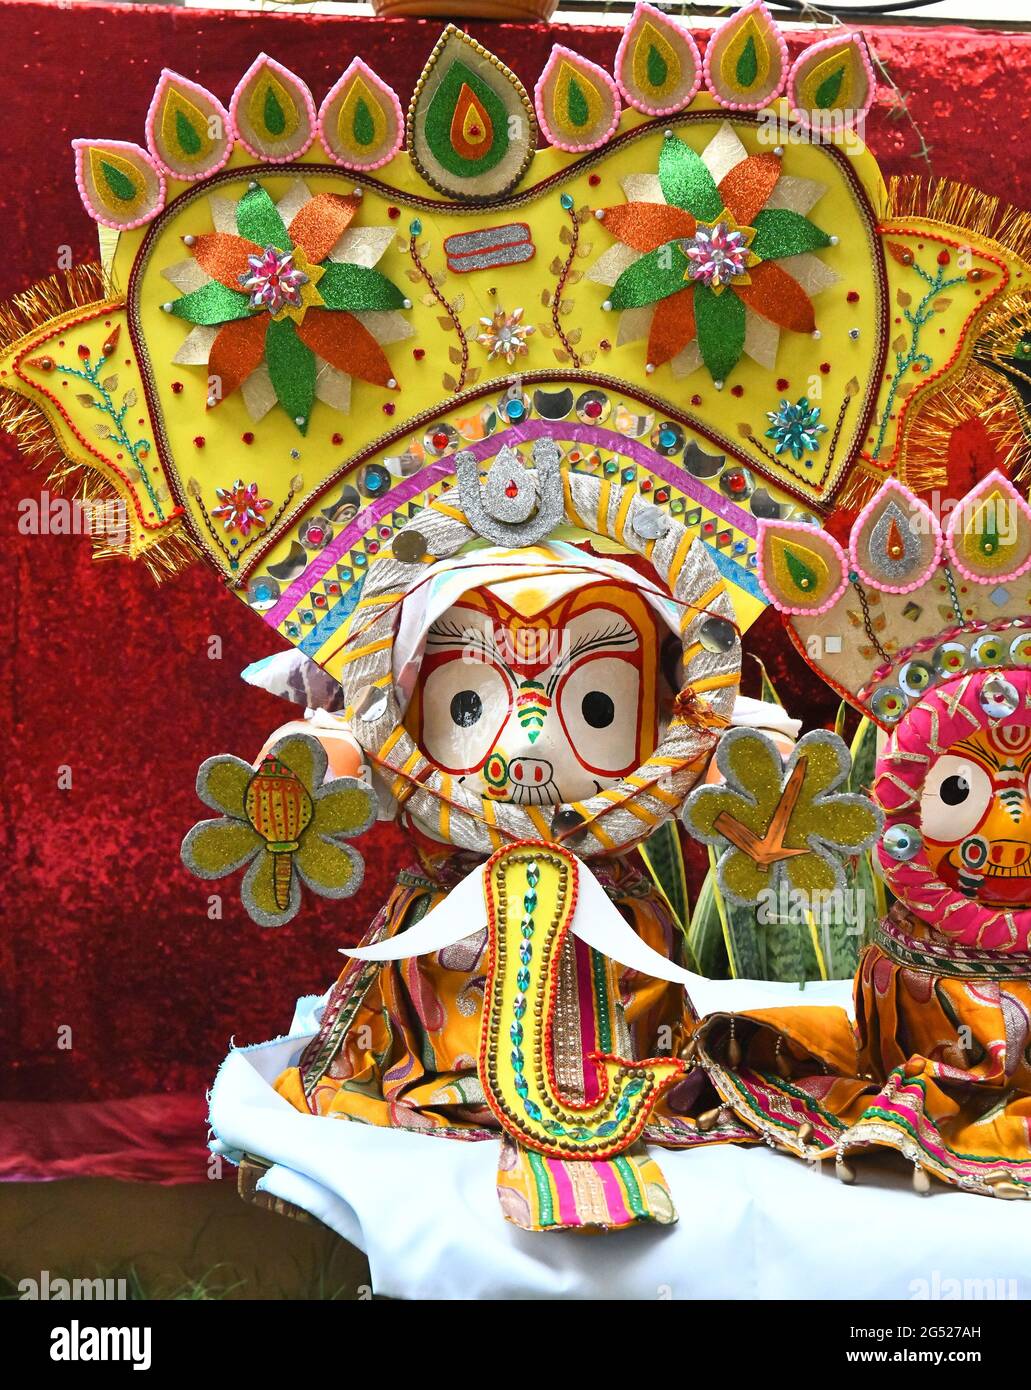 Beawar, Rajasthan, India, June 24, 2021: Decorative idol of God Balbhadra, brother of Lord Jagannath during holy festival Snan Yatra or a bathing ceremony on Jyeshtha Purnima (full moon day) at a temple in Beawar. Lord Jagannath rath yatra will be held on July 12. Nine-day annual festival Rath Yatra or chariot festival conducted every year for past 143 years but last year yatra was not allowed due to covid-19 restriction. This year as well, strict covid safety rules have been announced. Every year, hundreds of devotees participate and seek blessings. Credit: Sumit Saraswat/Alamy Live News Stock Photo